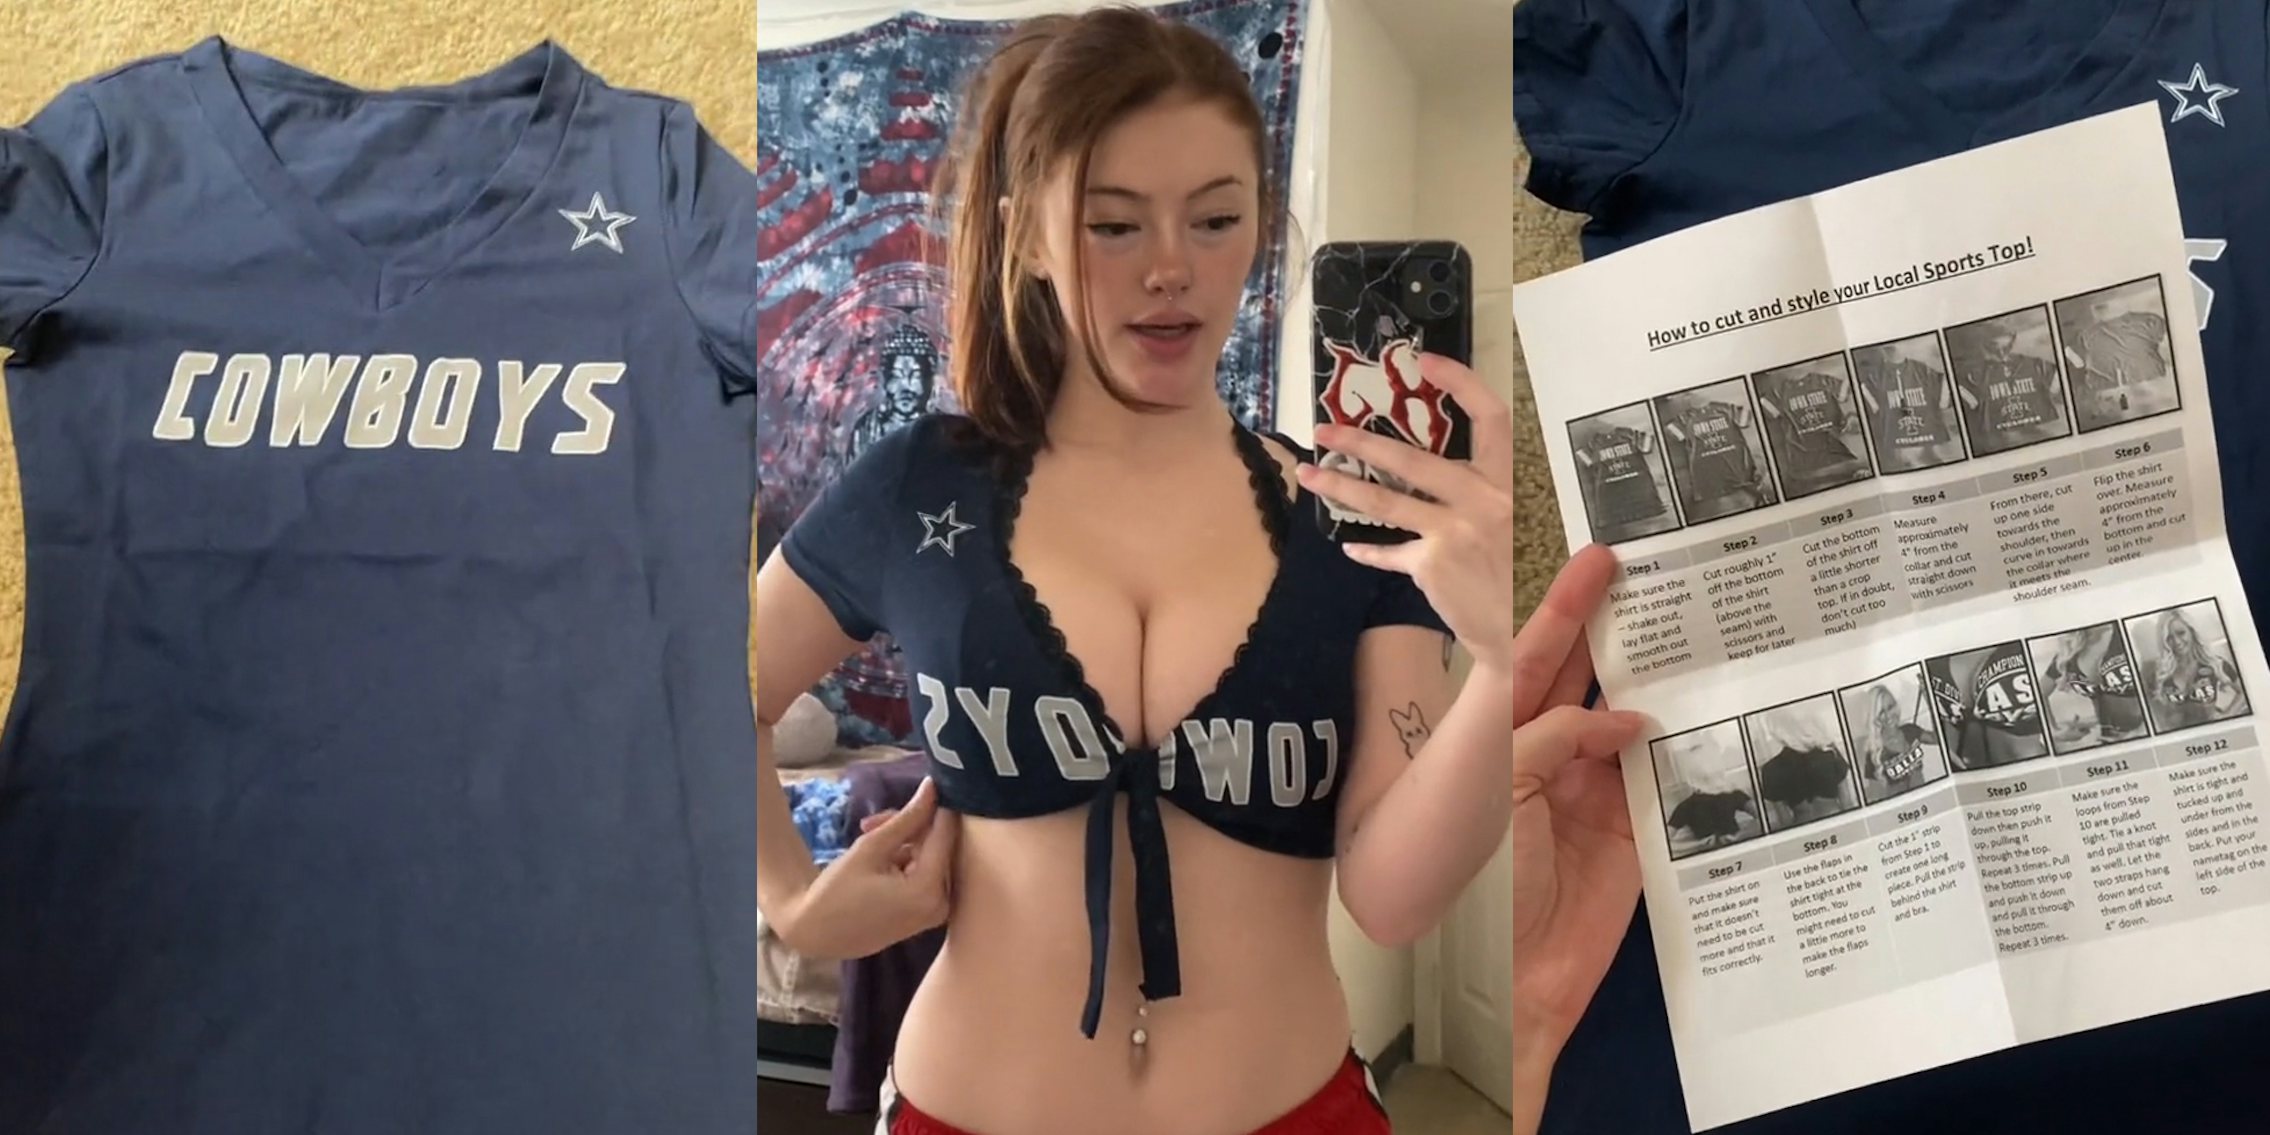 Cowboys blue shirt on rug (l) Twin Peaks waitress in cowboys blue shirt (c)woman holding Cutting and Styling guide paper in front of blue Cowboys shirt (r)